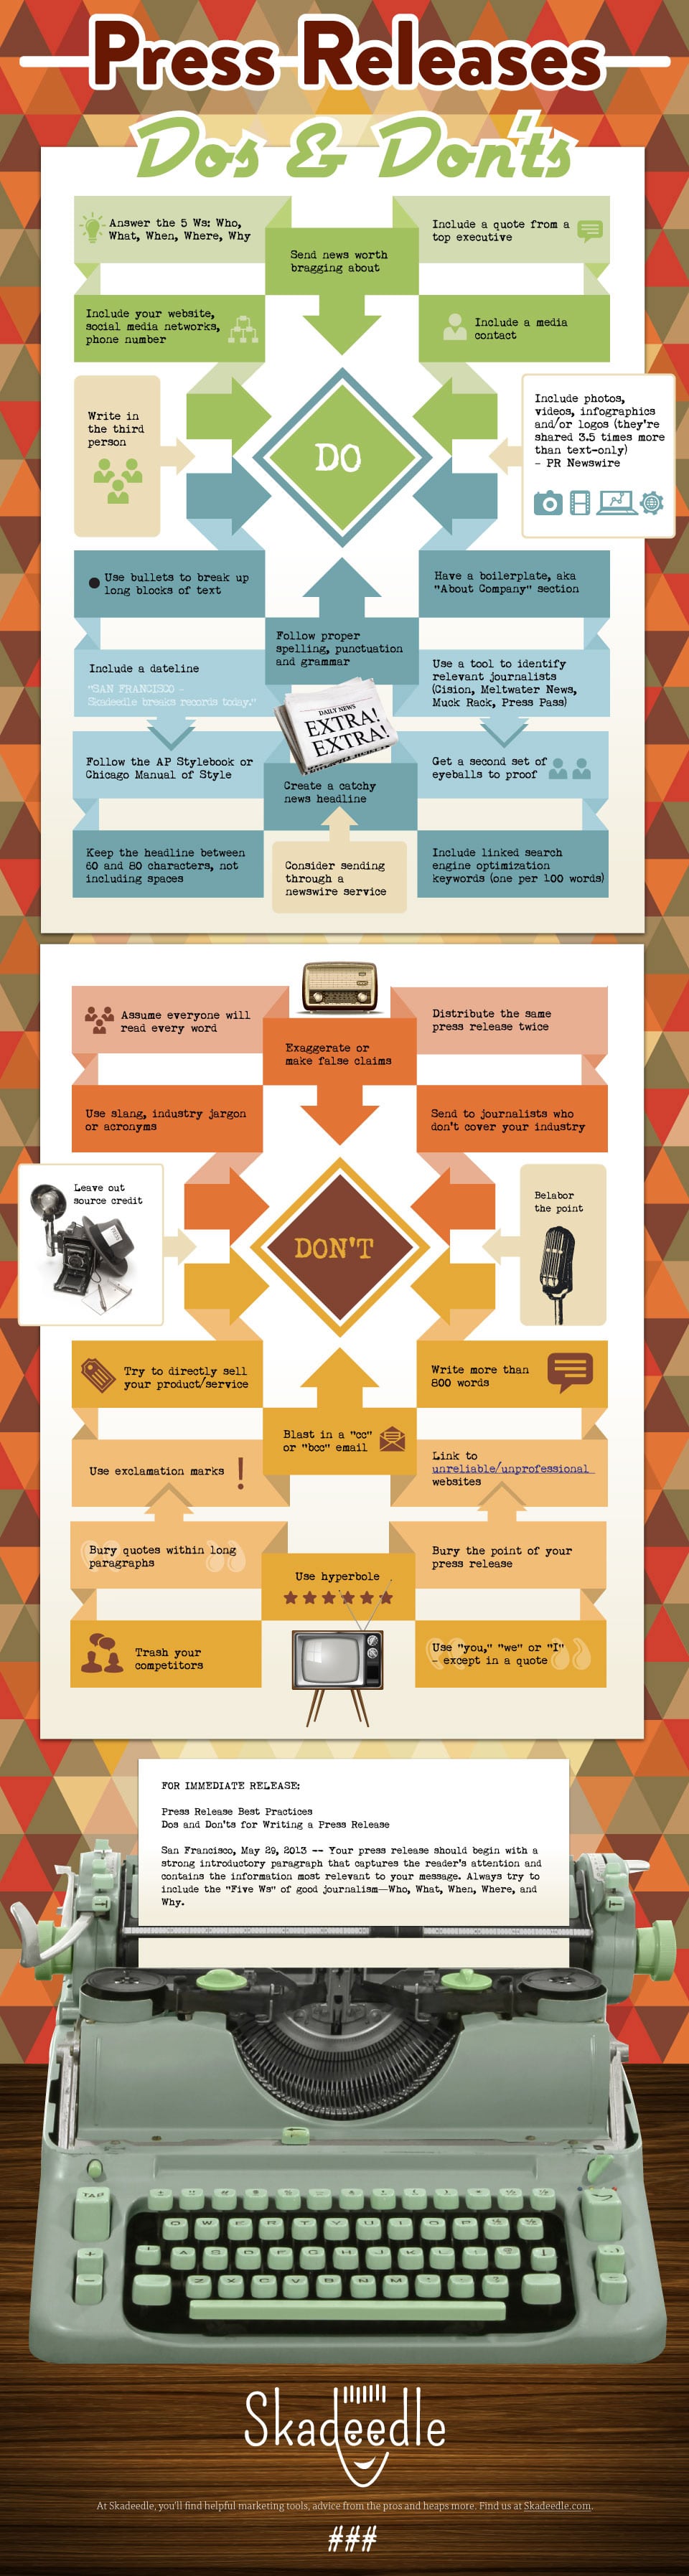 How To Craft An Attention Grabbing Press Release [Infographic]